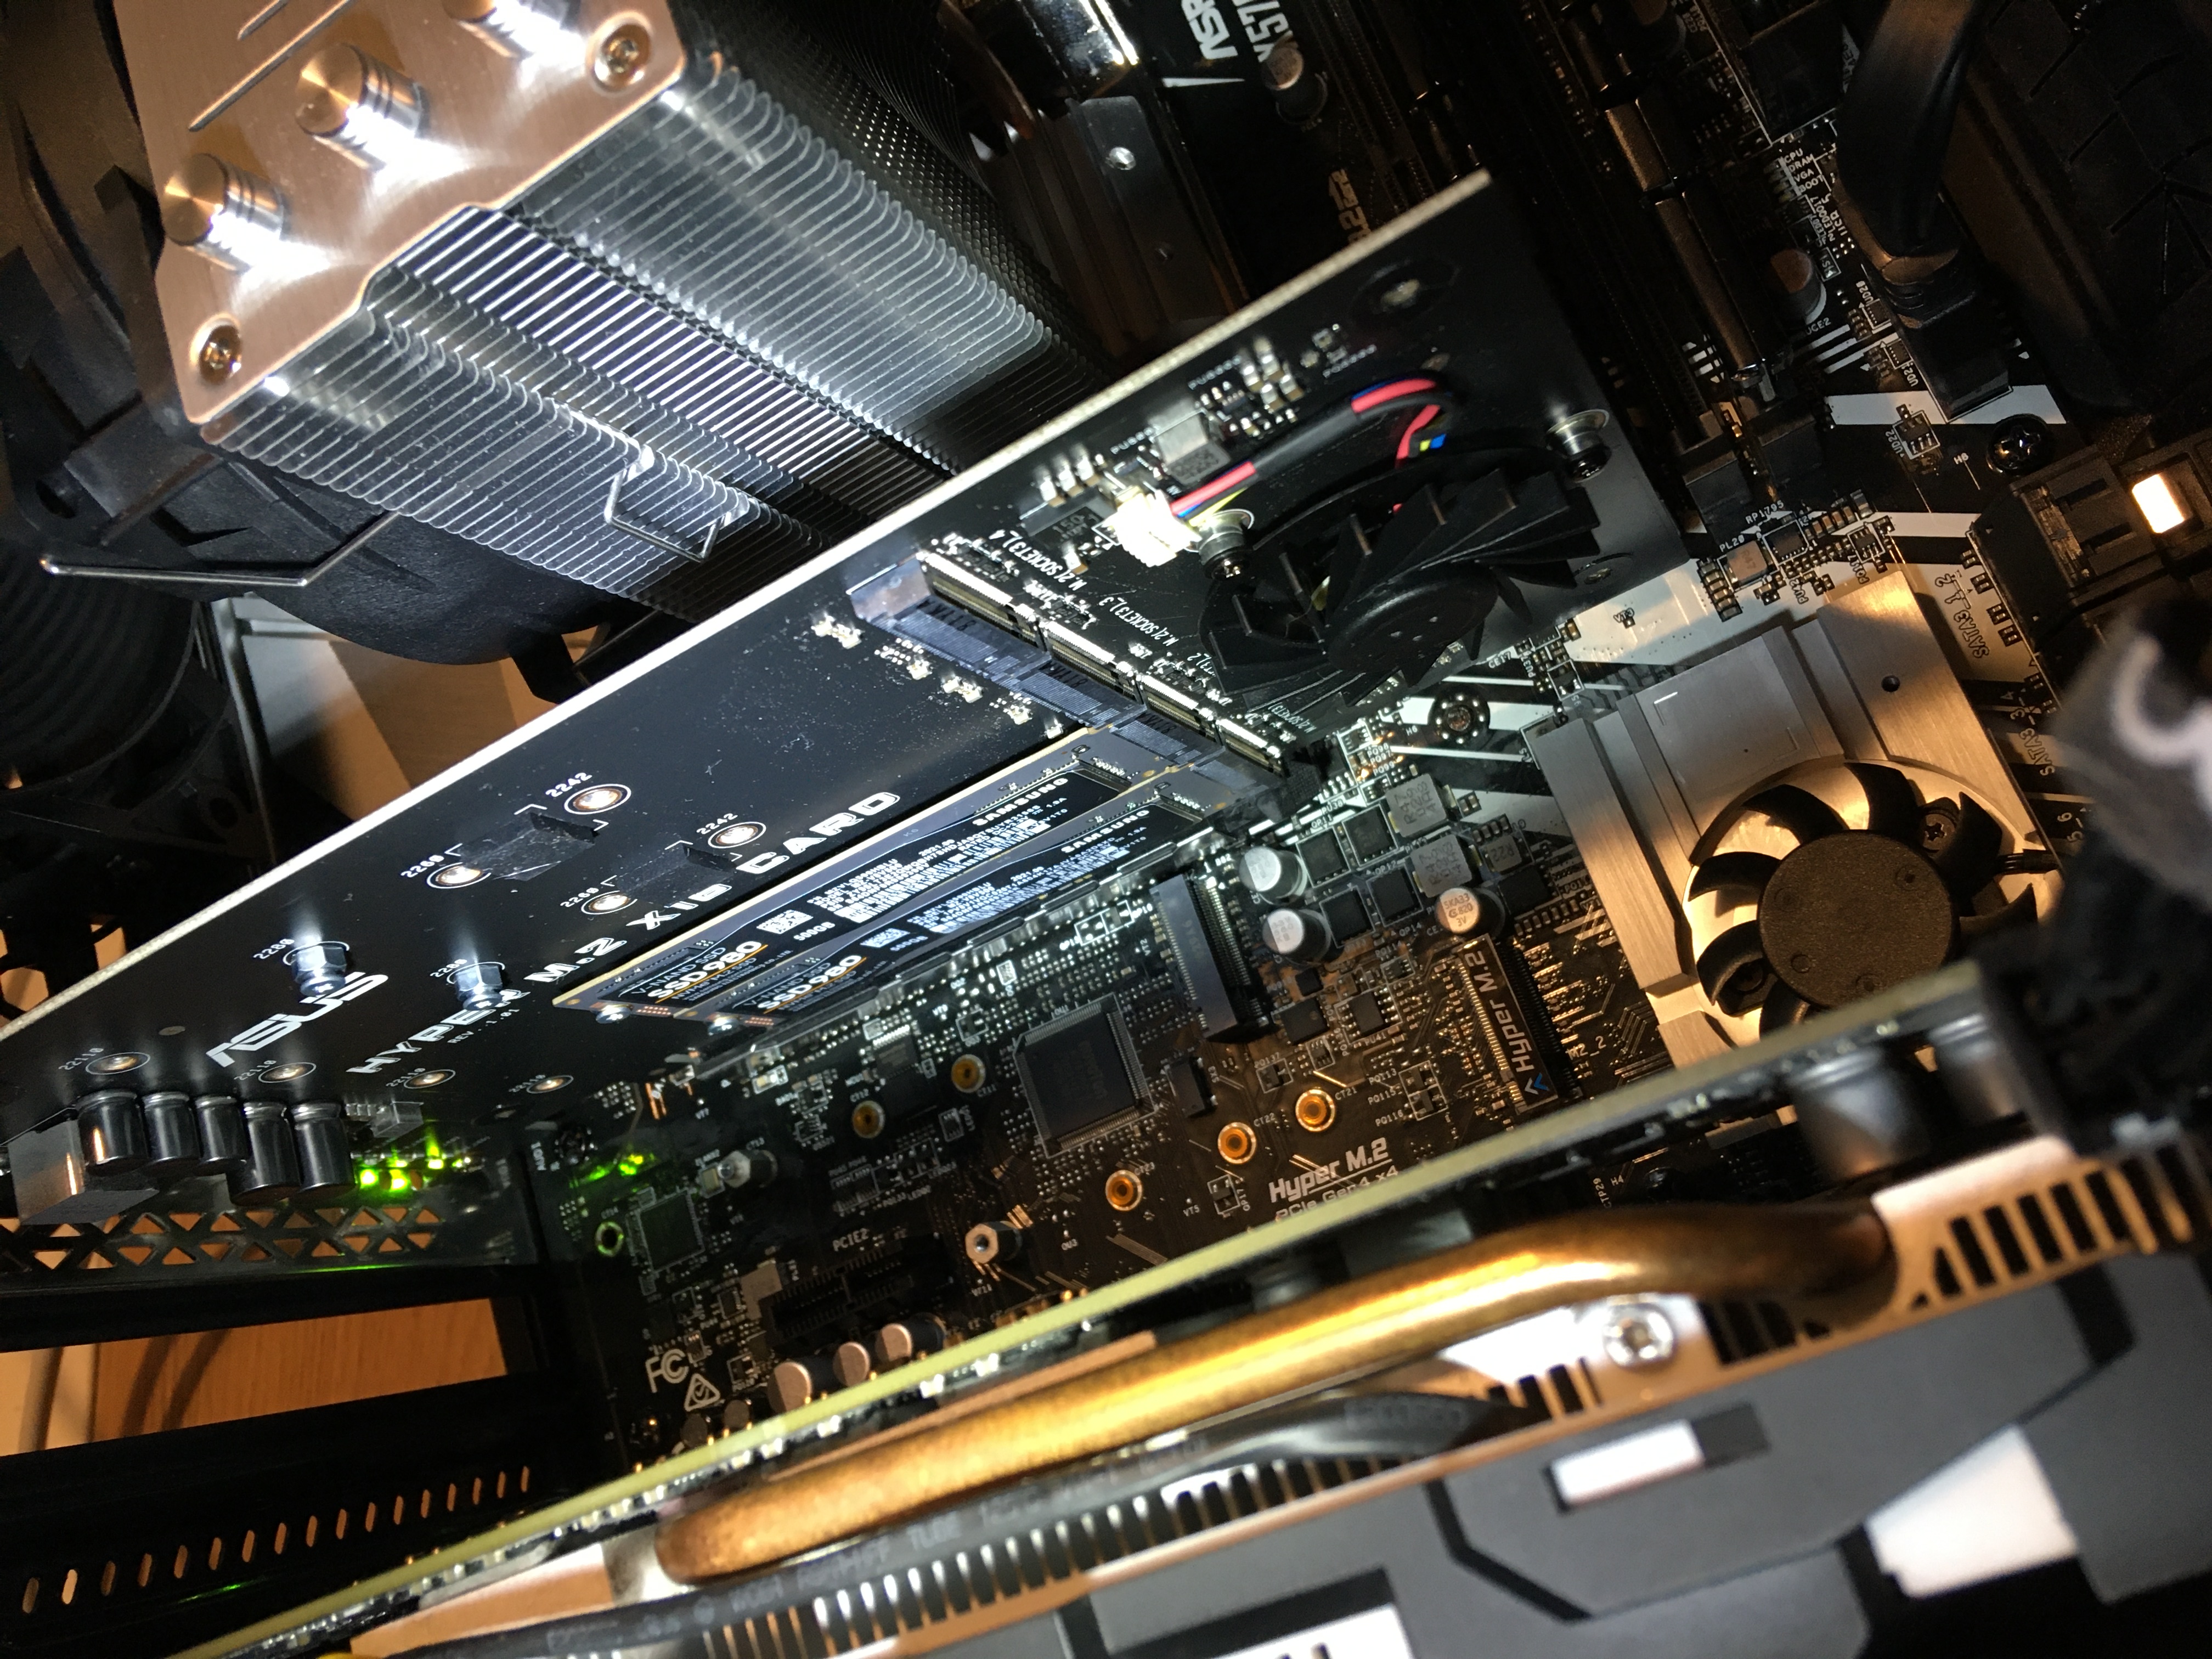 ASRock X570M Pro4 motherboard overview :: ./techtipsy — Ramblings 